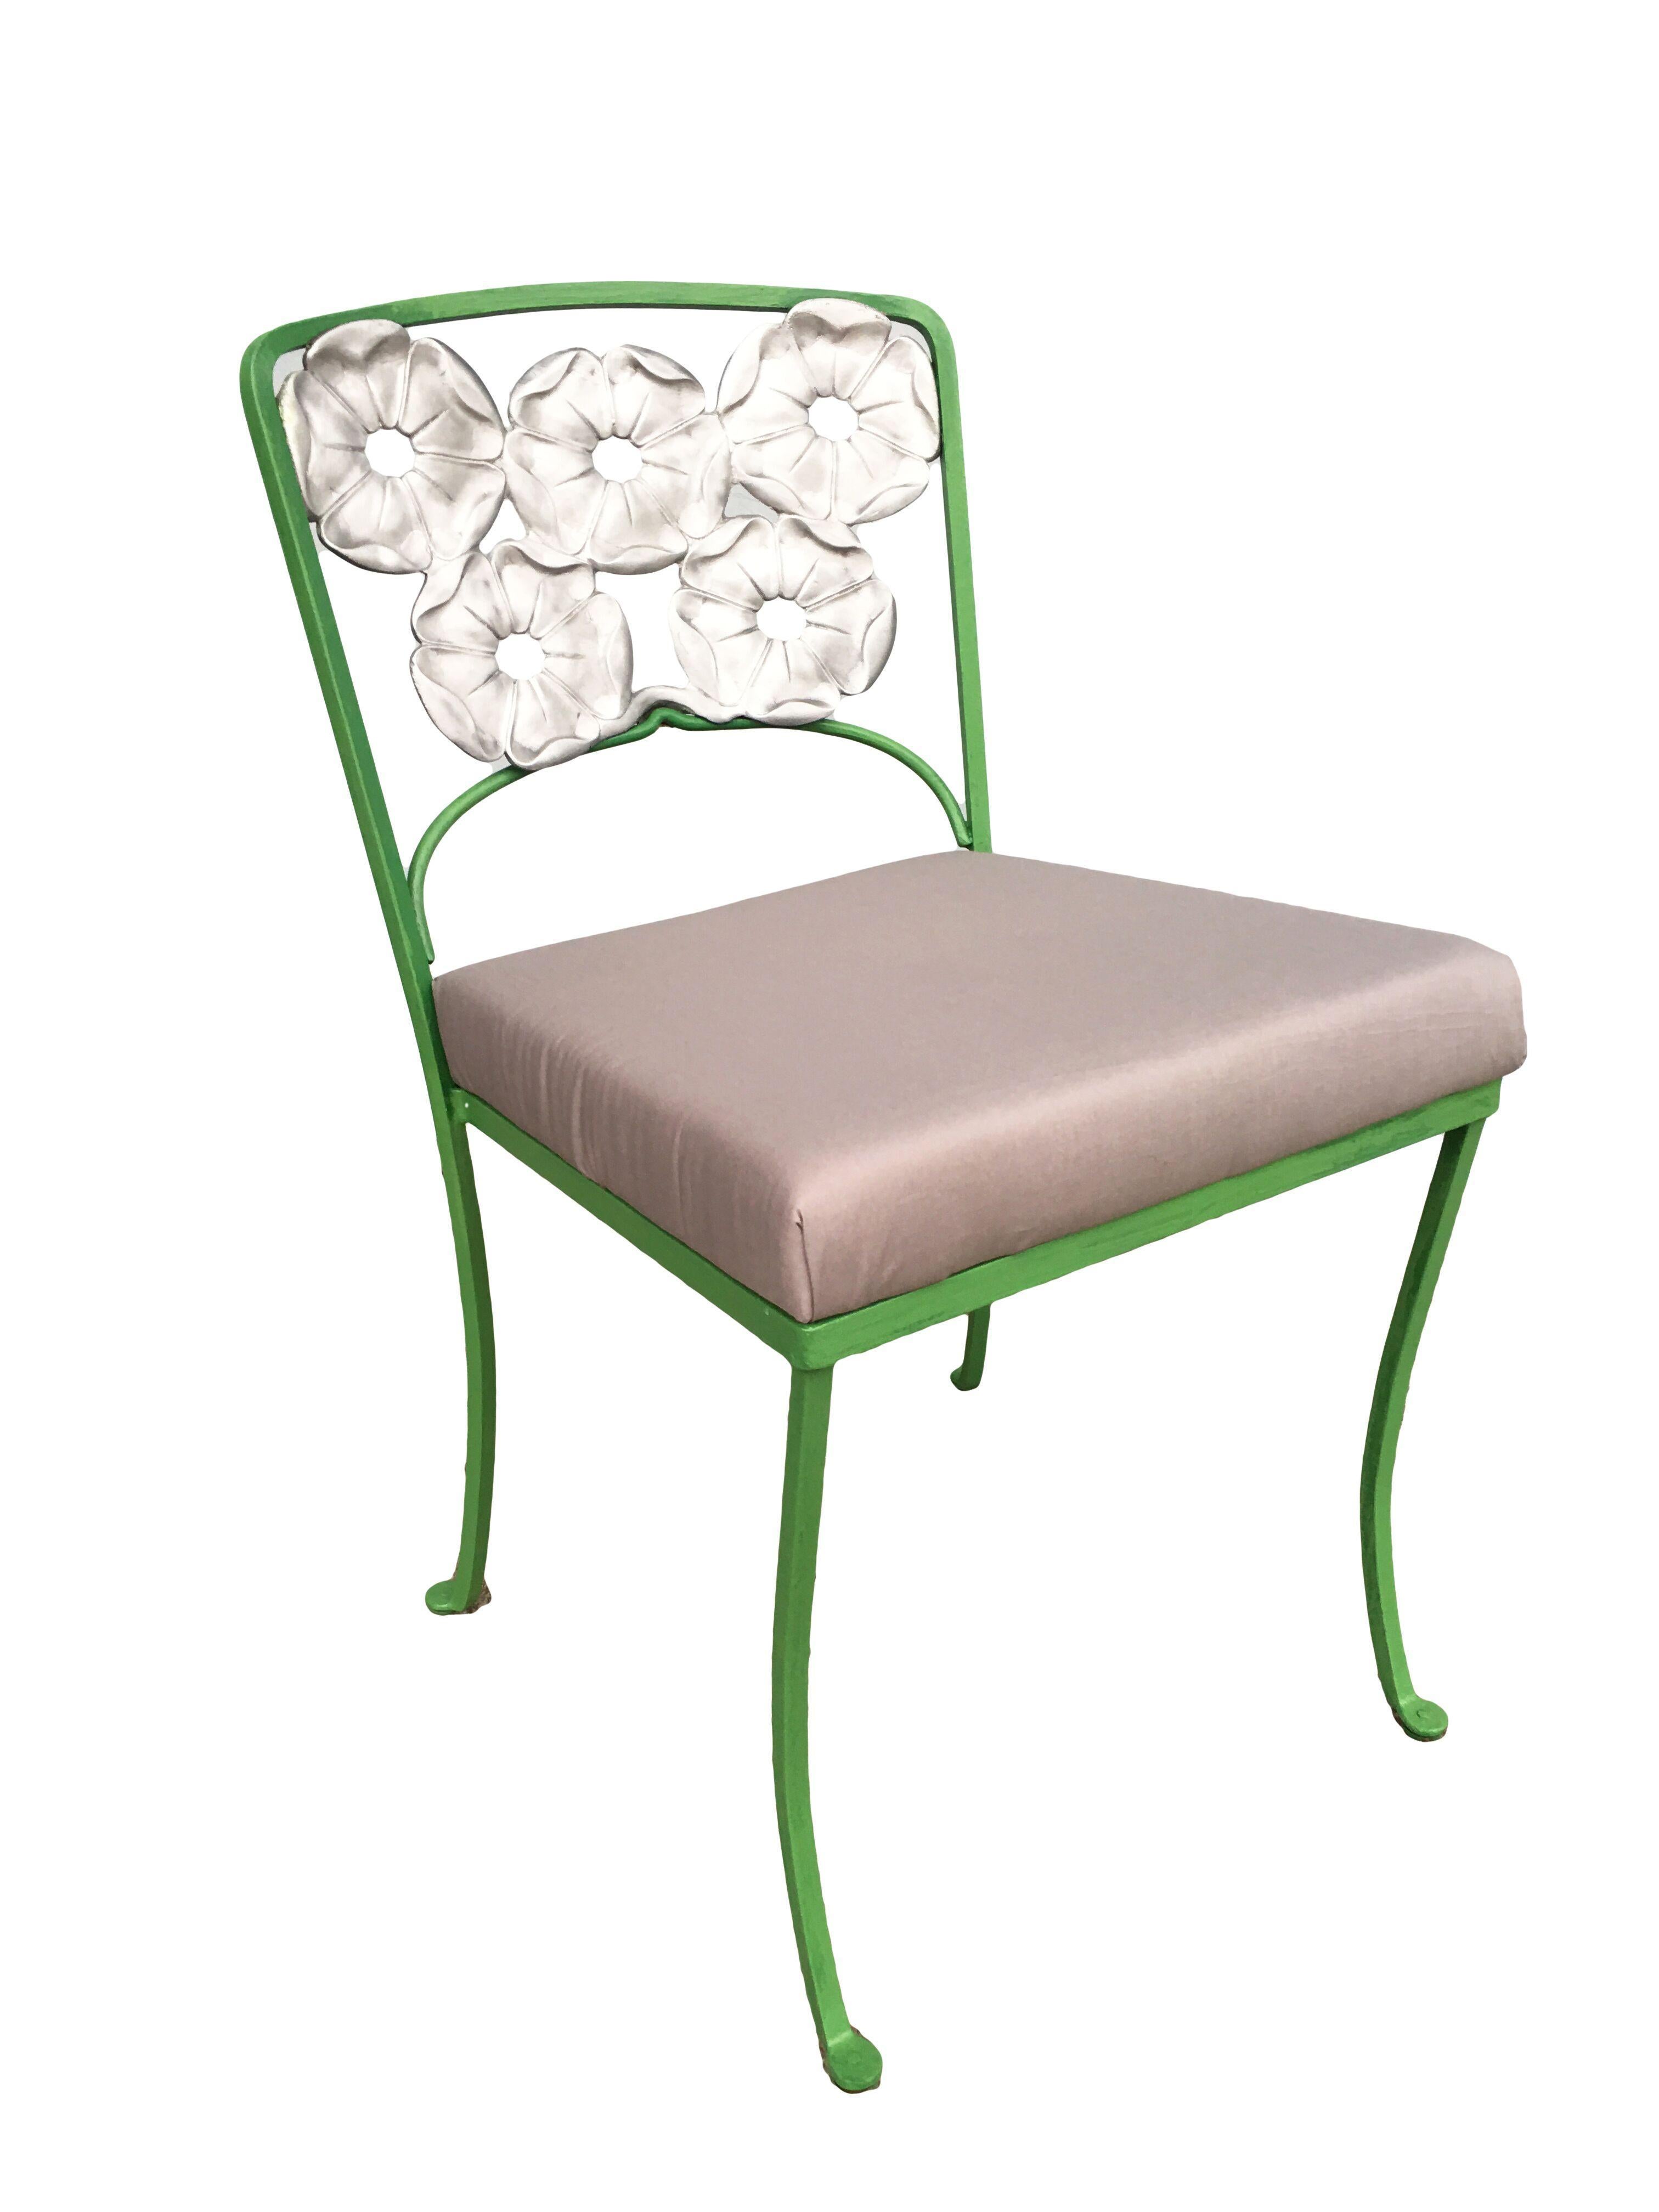 Woodard wrought iron outdoor/patio chair with a distinct silver-painted floral pattern backrest. This chair is constructed with solid core iron castings and is finished in green, circa 1950. All outdoor furniture can be repainted in the color of the